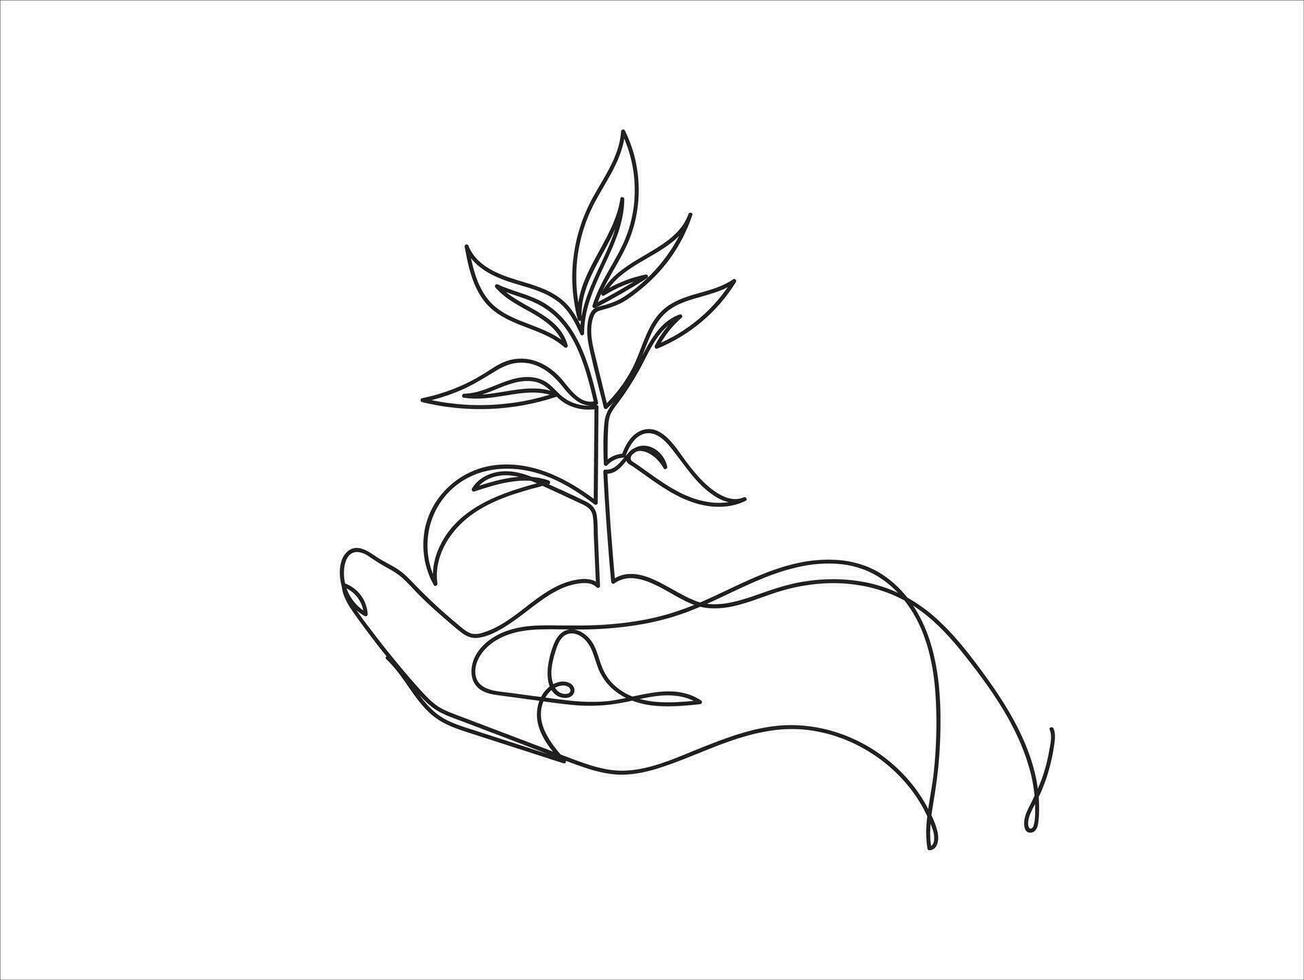 Continuous one-line drawing hand holding a plant with many roots world environment day concept vector